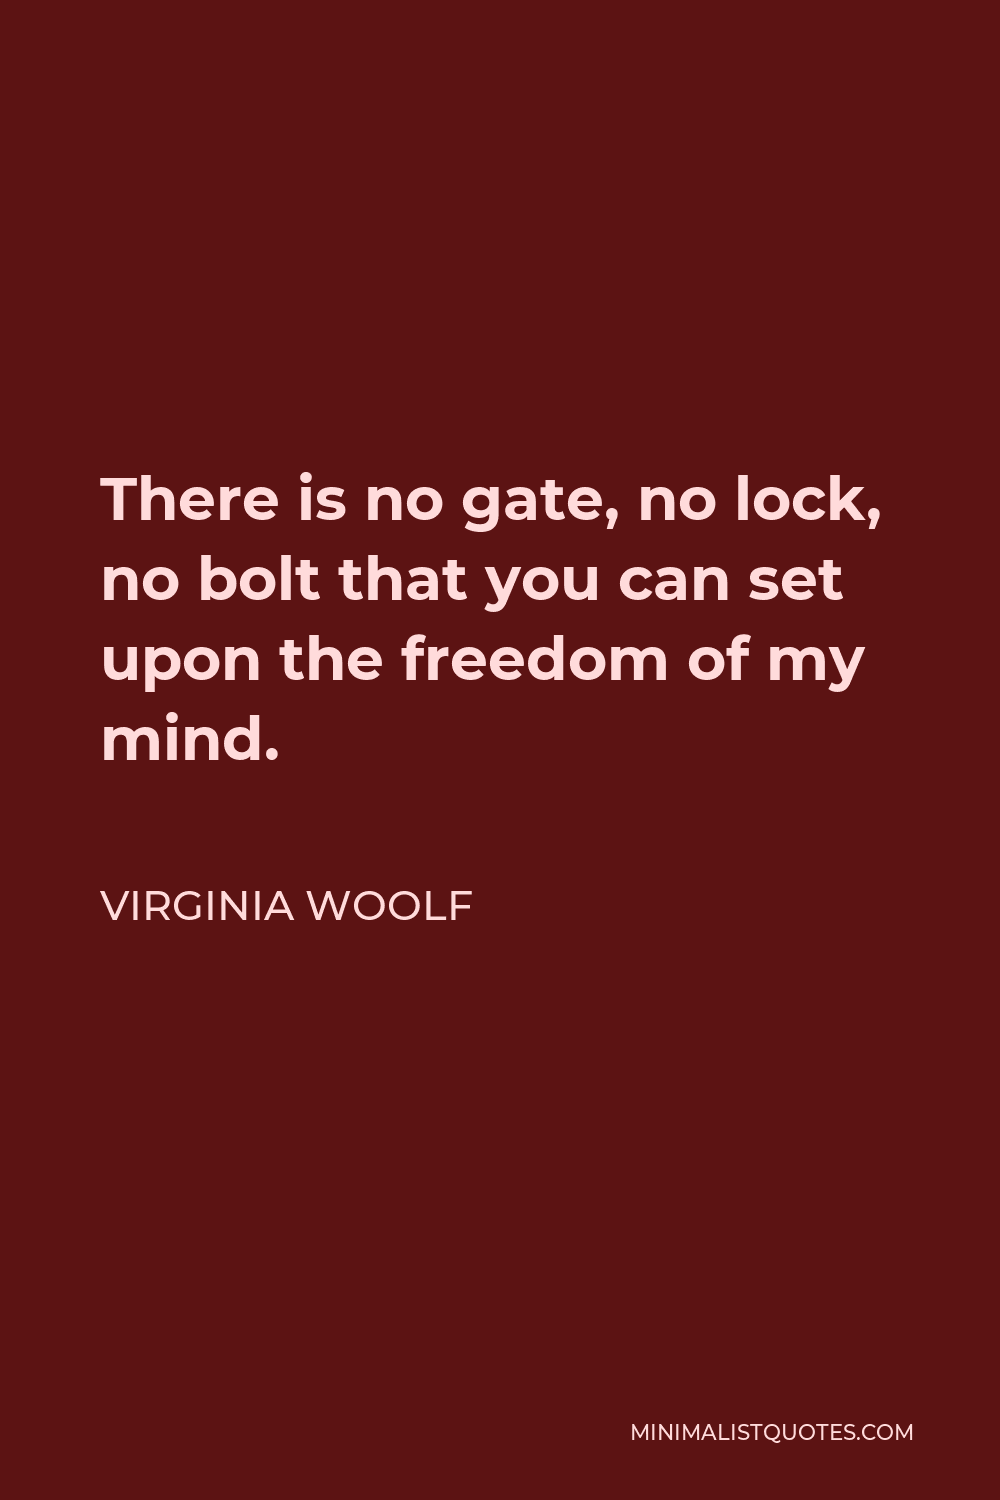 Virginia Woolf Quote - There is no gate, no lock, no bolt that you can set upon the freedom of my mind.